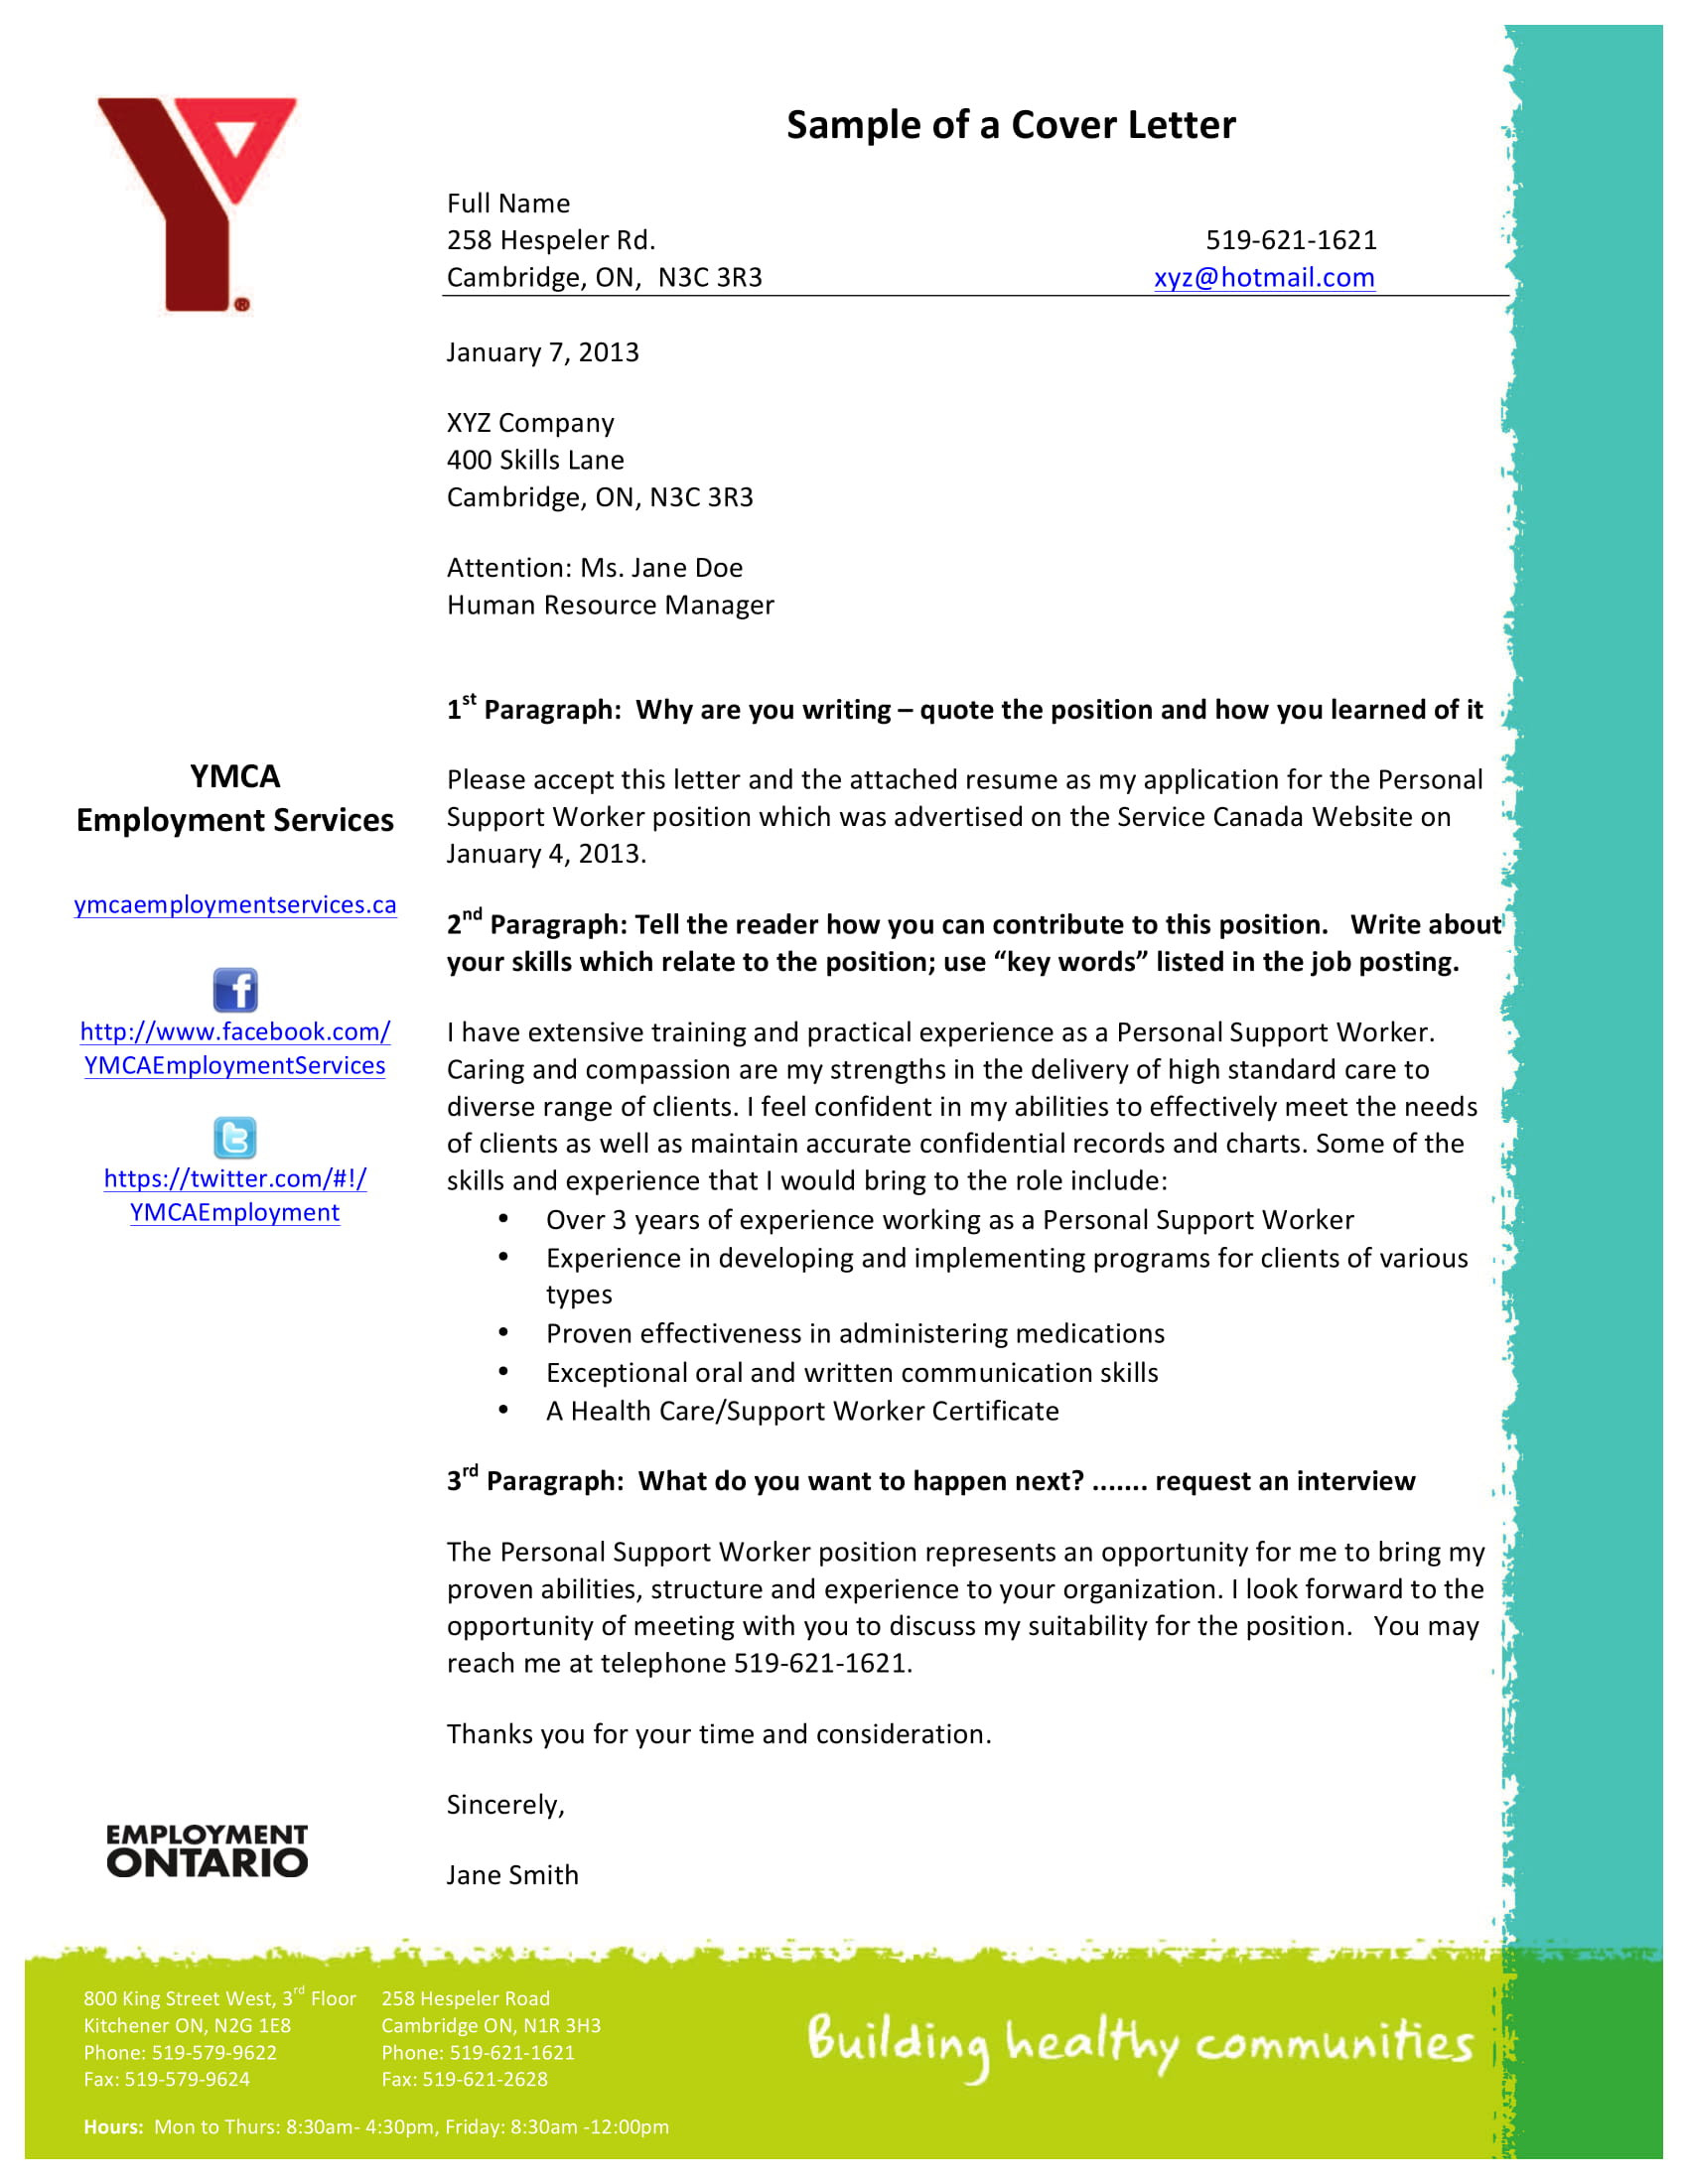 Sample Cover Letter Template 21 Cover Letter Examples Pdf